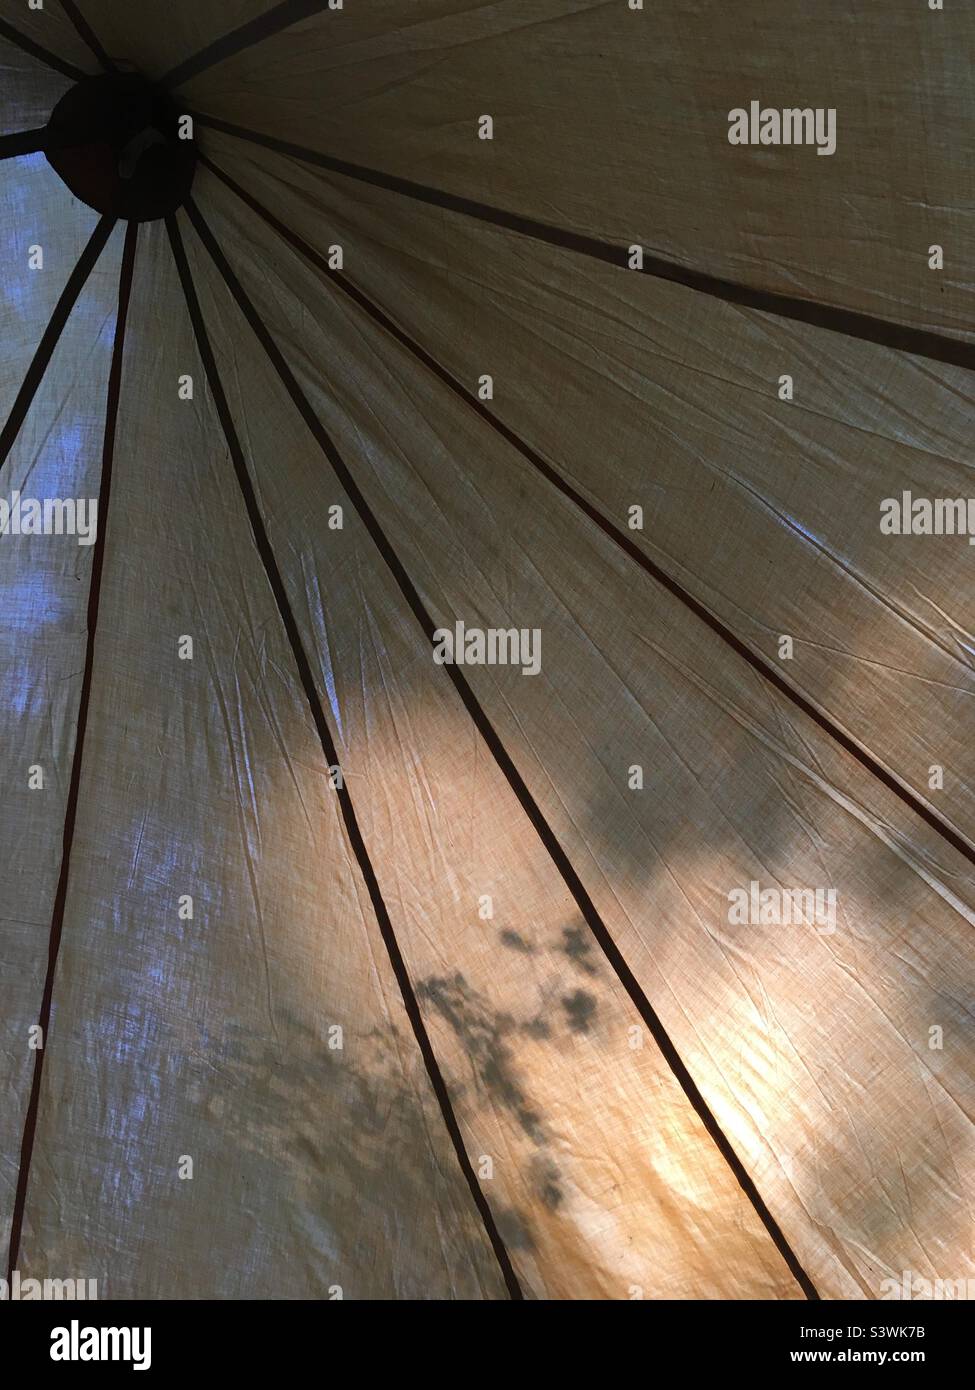 Looking up at dappled sunlight on an old canvas tent Stock Photo